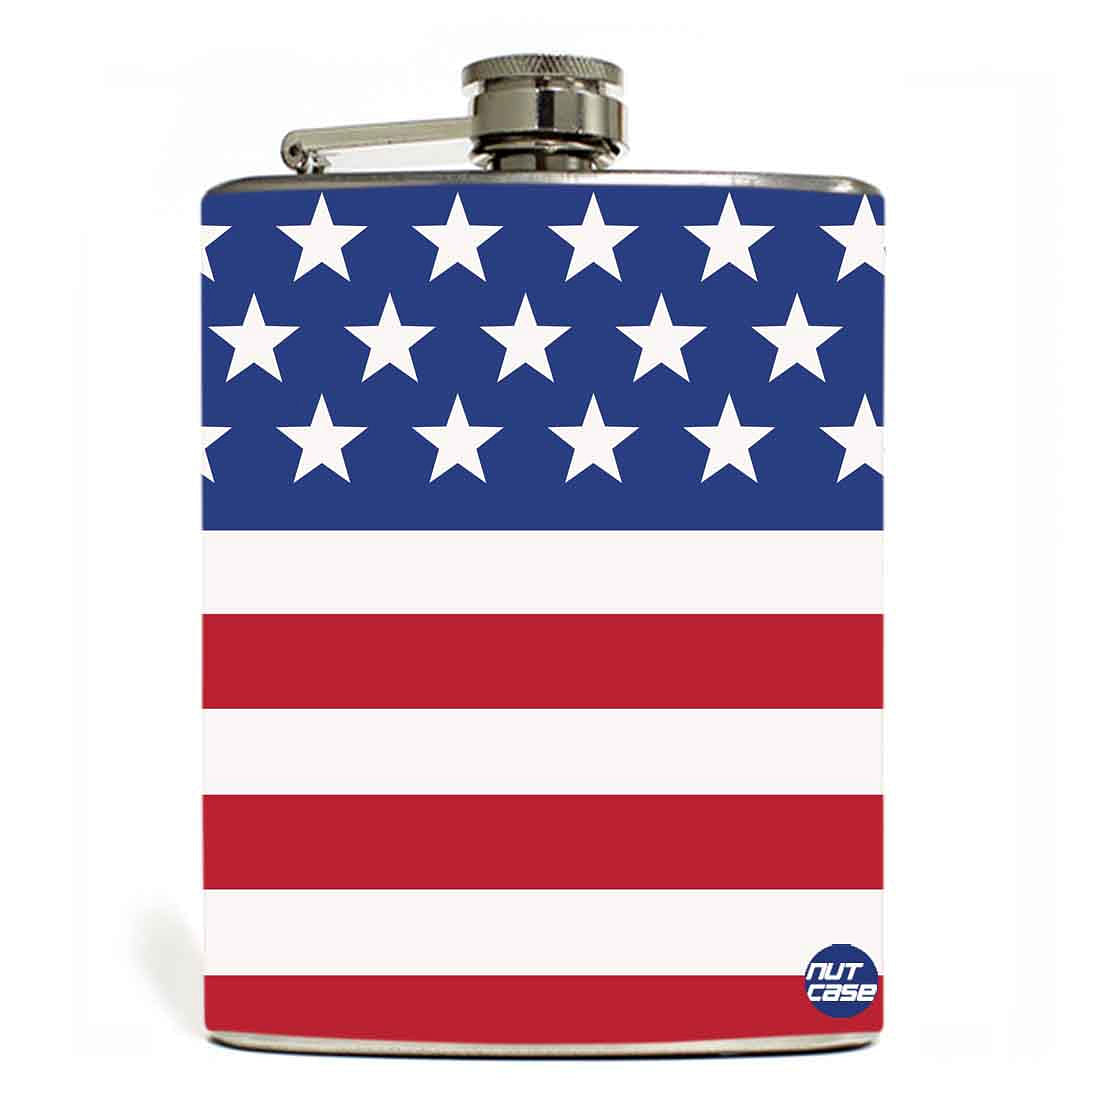 Hip Flask - US Stars And Strips Nutcase